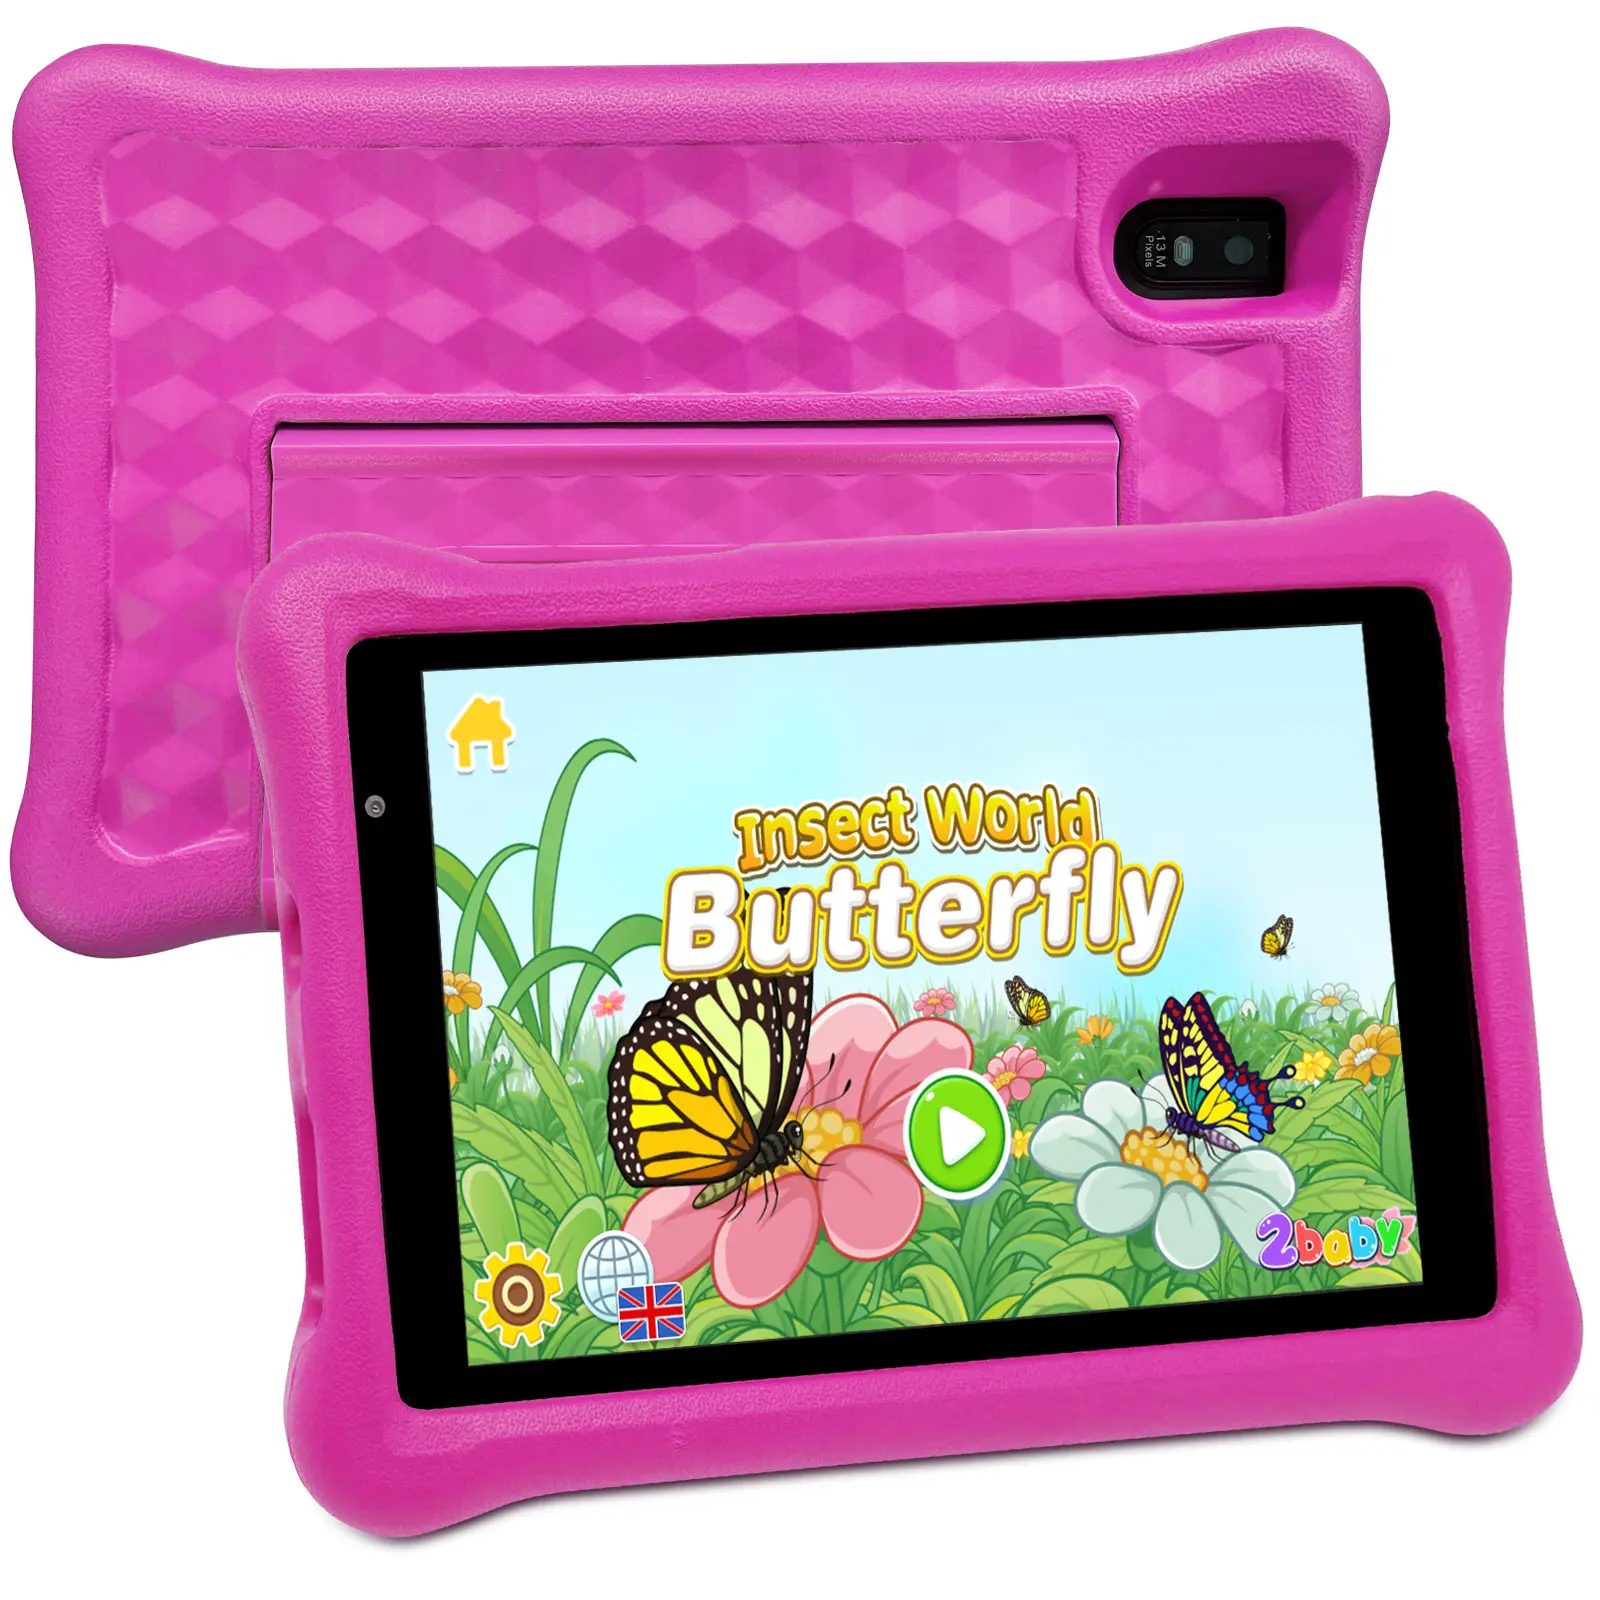 Amazon verkauft sich gut Kinder Tablet Private Model mit Lern software Gaming Education 8 Zoll Android Kids Tablet Pc